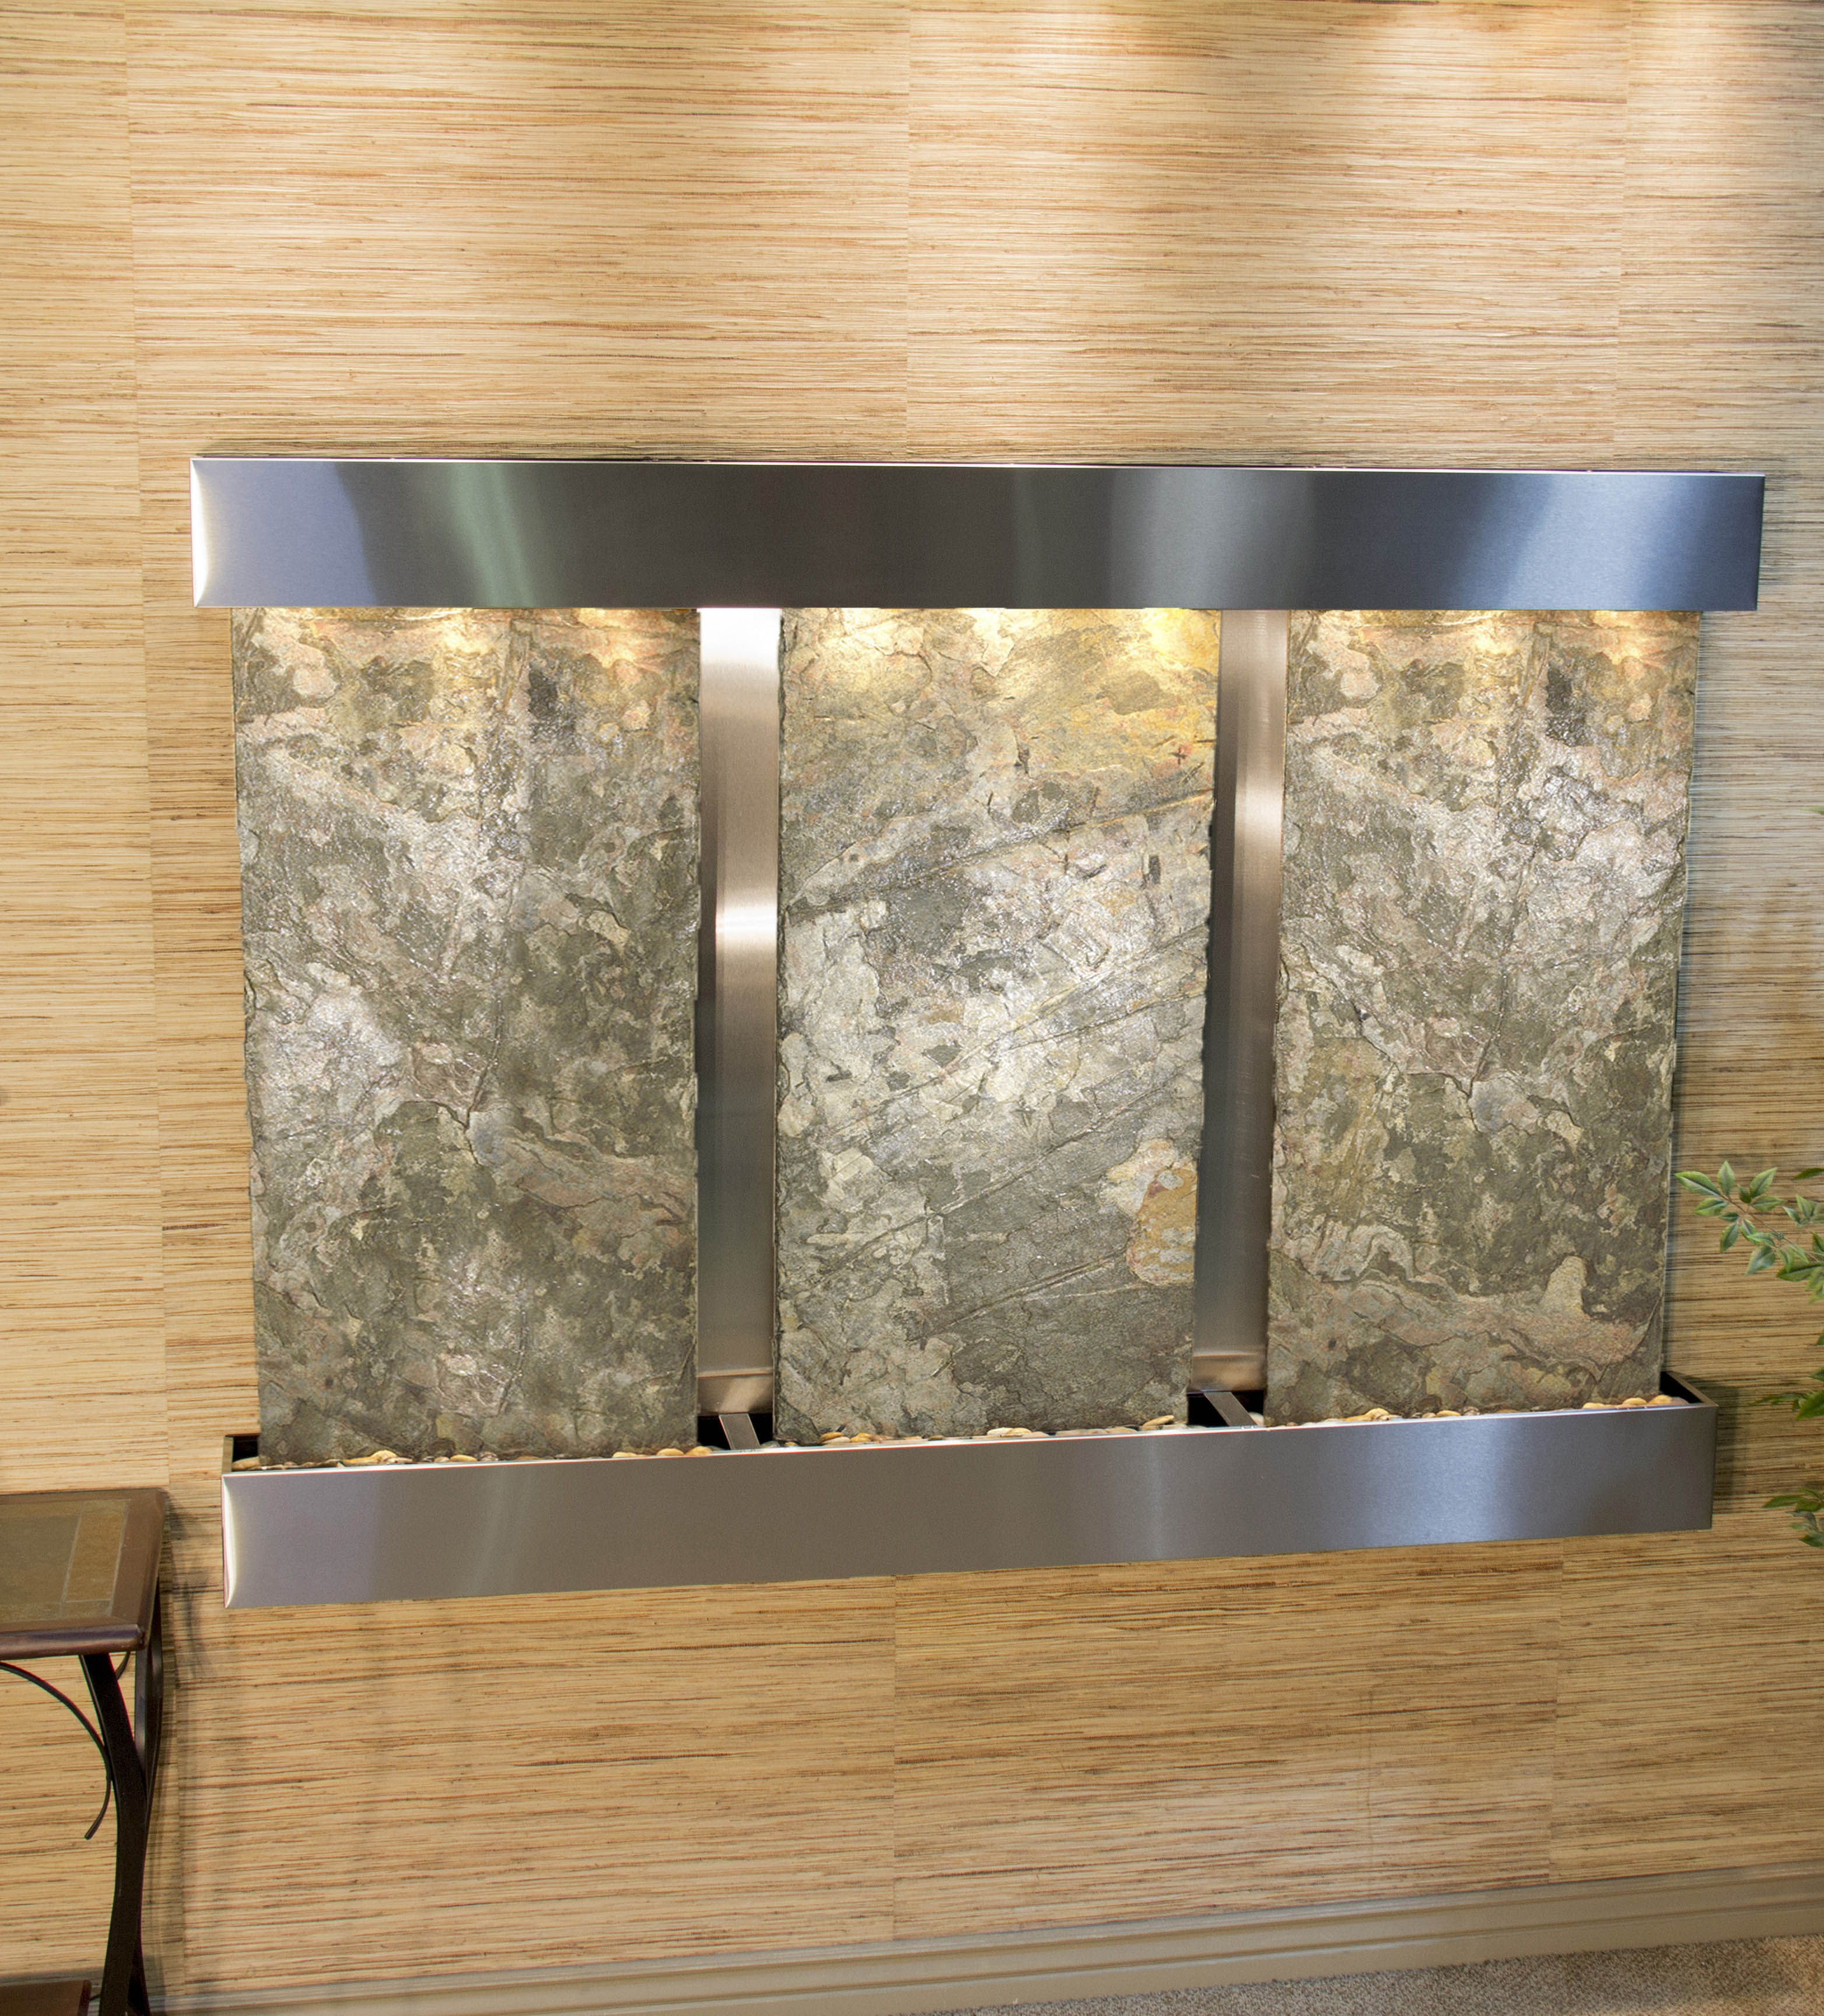 Green Natural Slate, Stainless Steel Trim, Square Edges